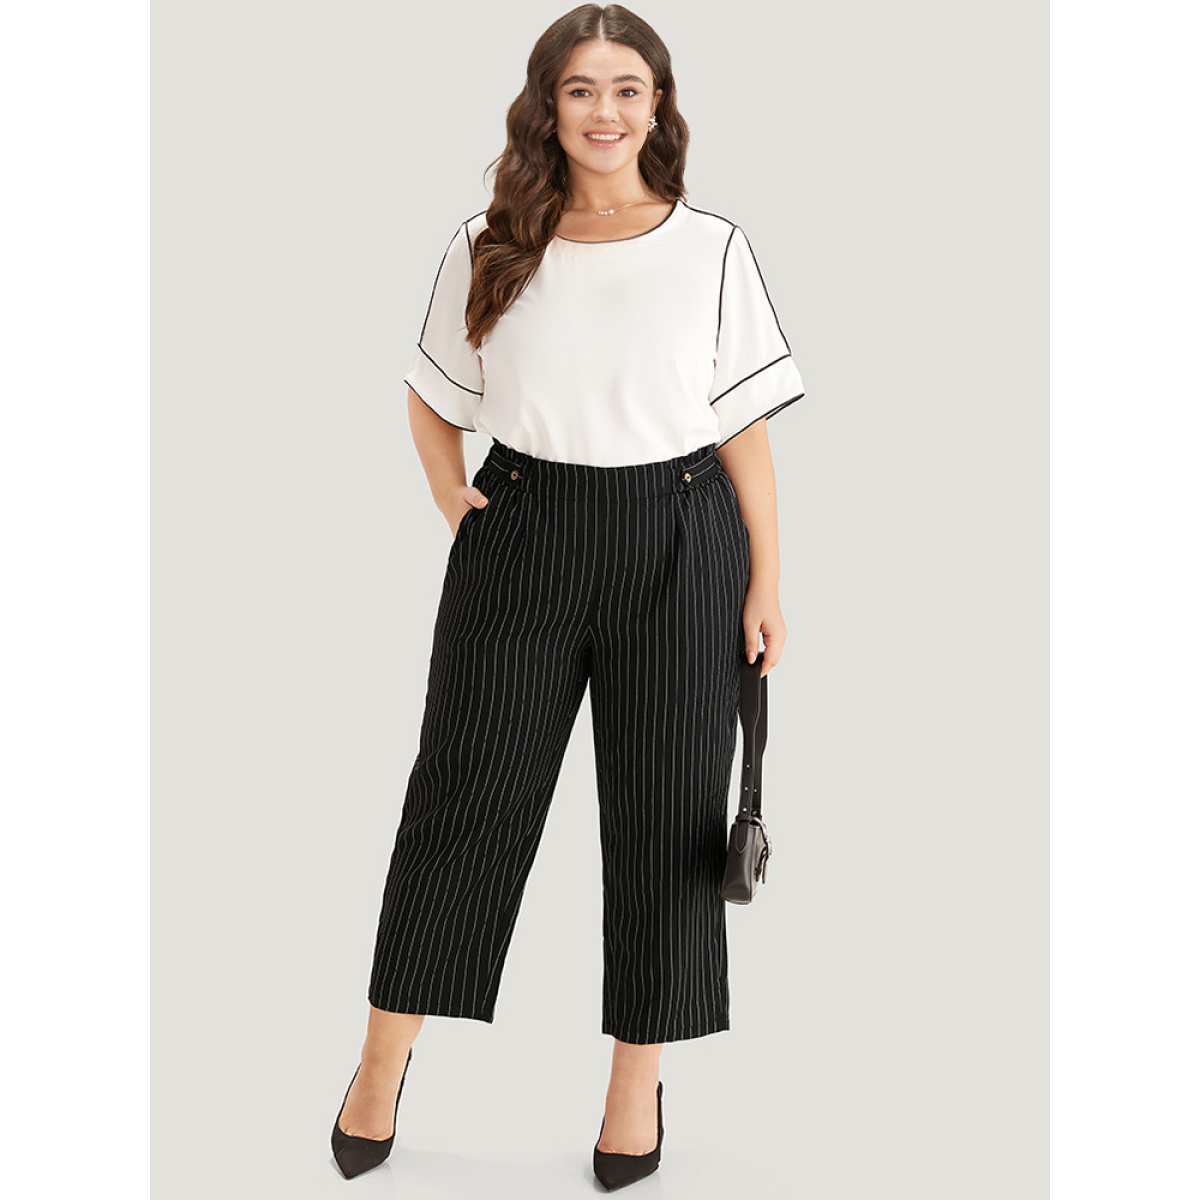 

Plus Size Striped Button Detail Pocket Pleated Pants Women Black Office Straight Leg High Rise Work Pants BloomChic